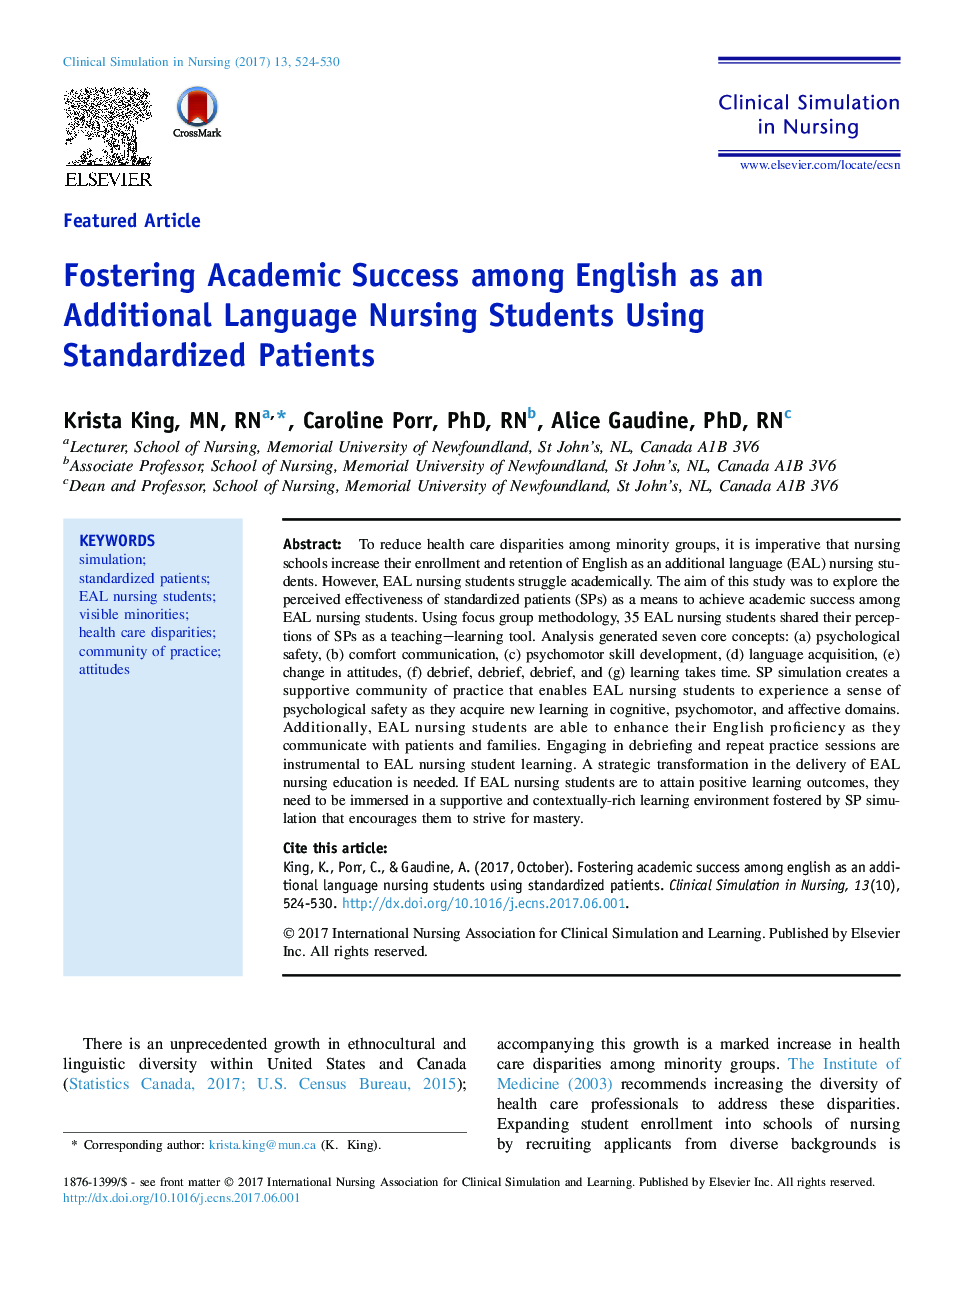 Fostering Academic Success among English as an Additional Language Nursing Students Using Standardized Patients